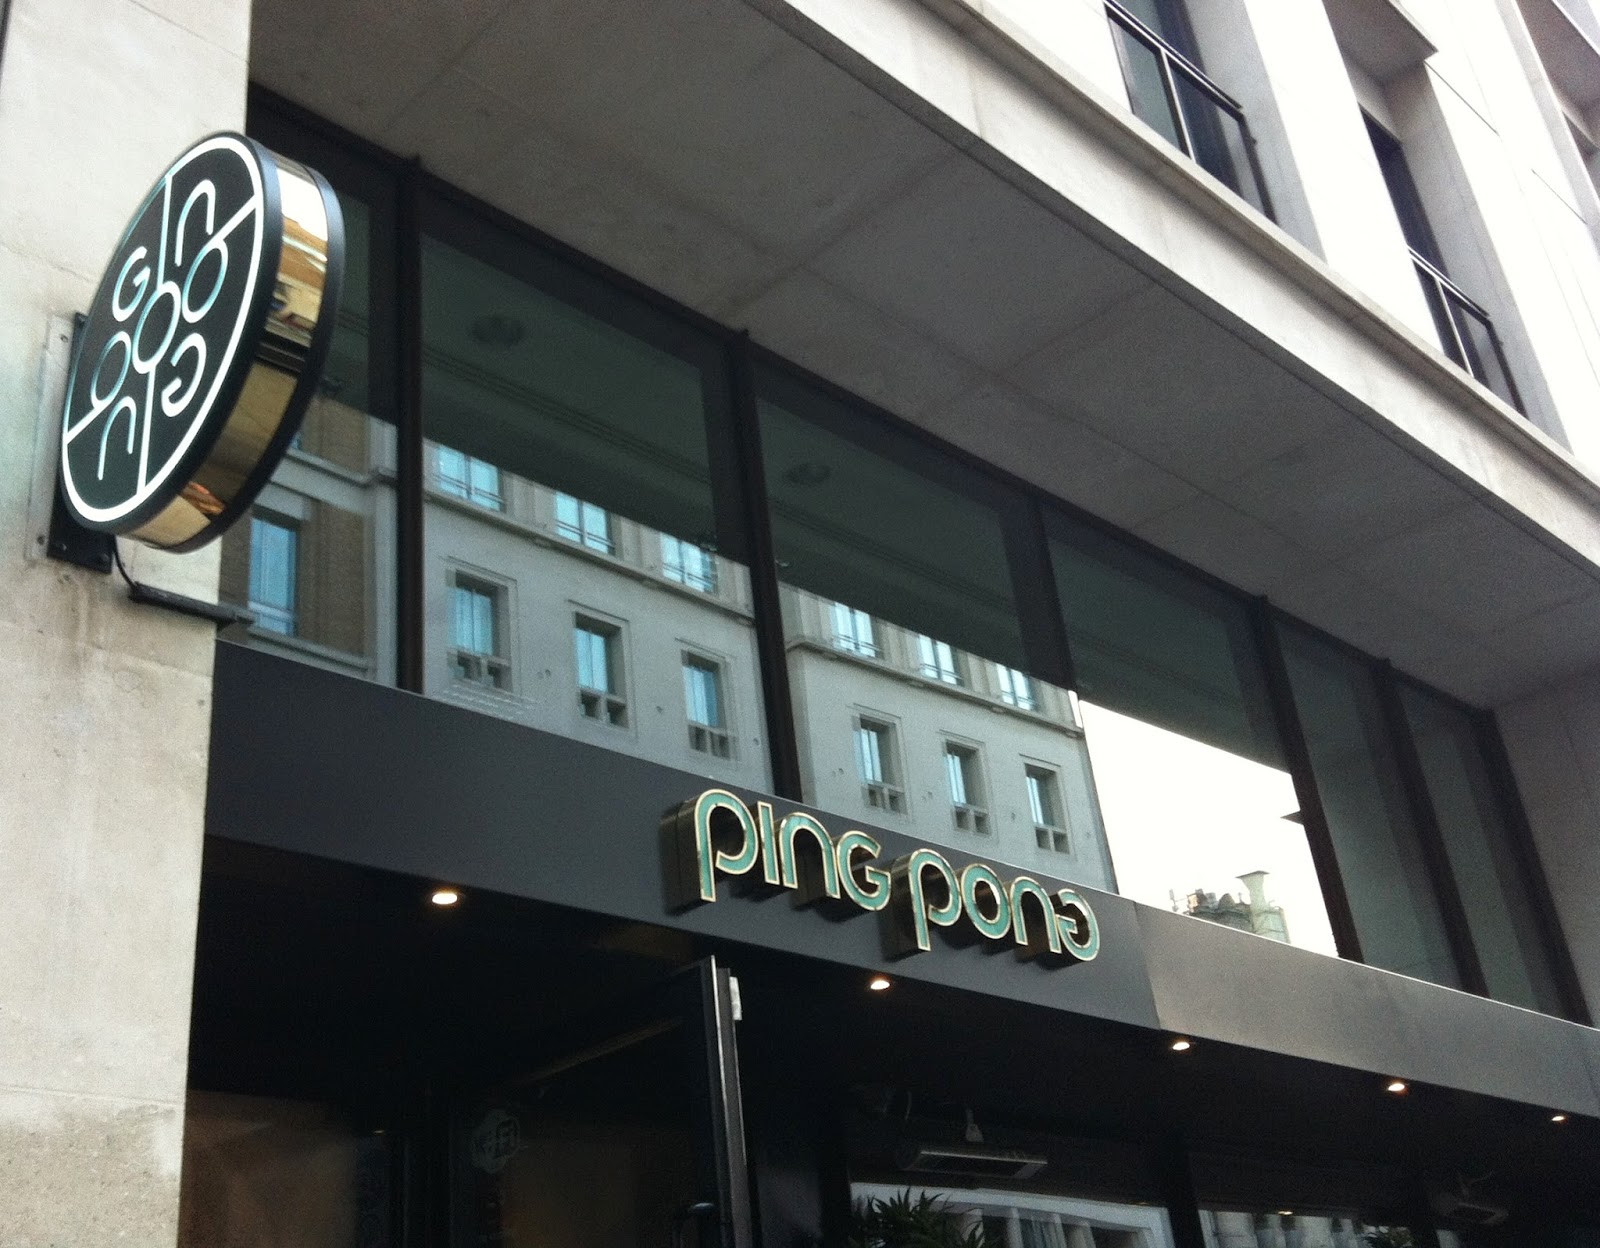 Ping Pong Dim Sum in Soho review - Why not try one of the 8 locations around London to try some steamed, baked, fried or grilled dim sum (the cocktails are pretty good as well!)